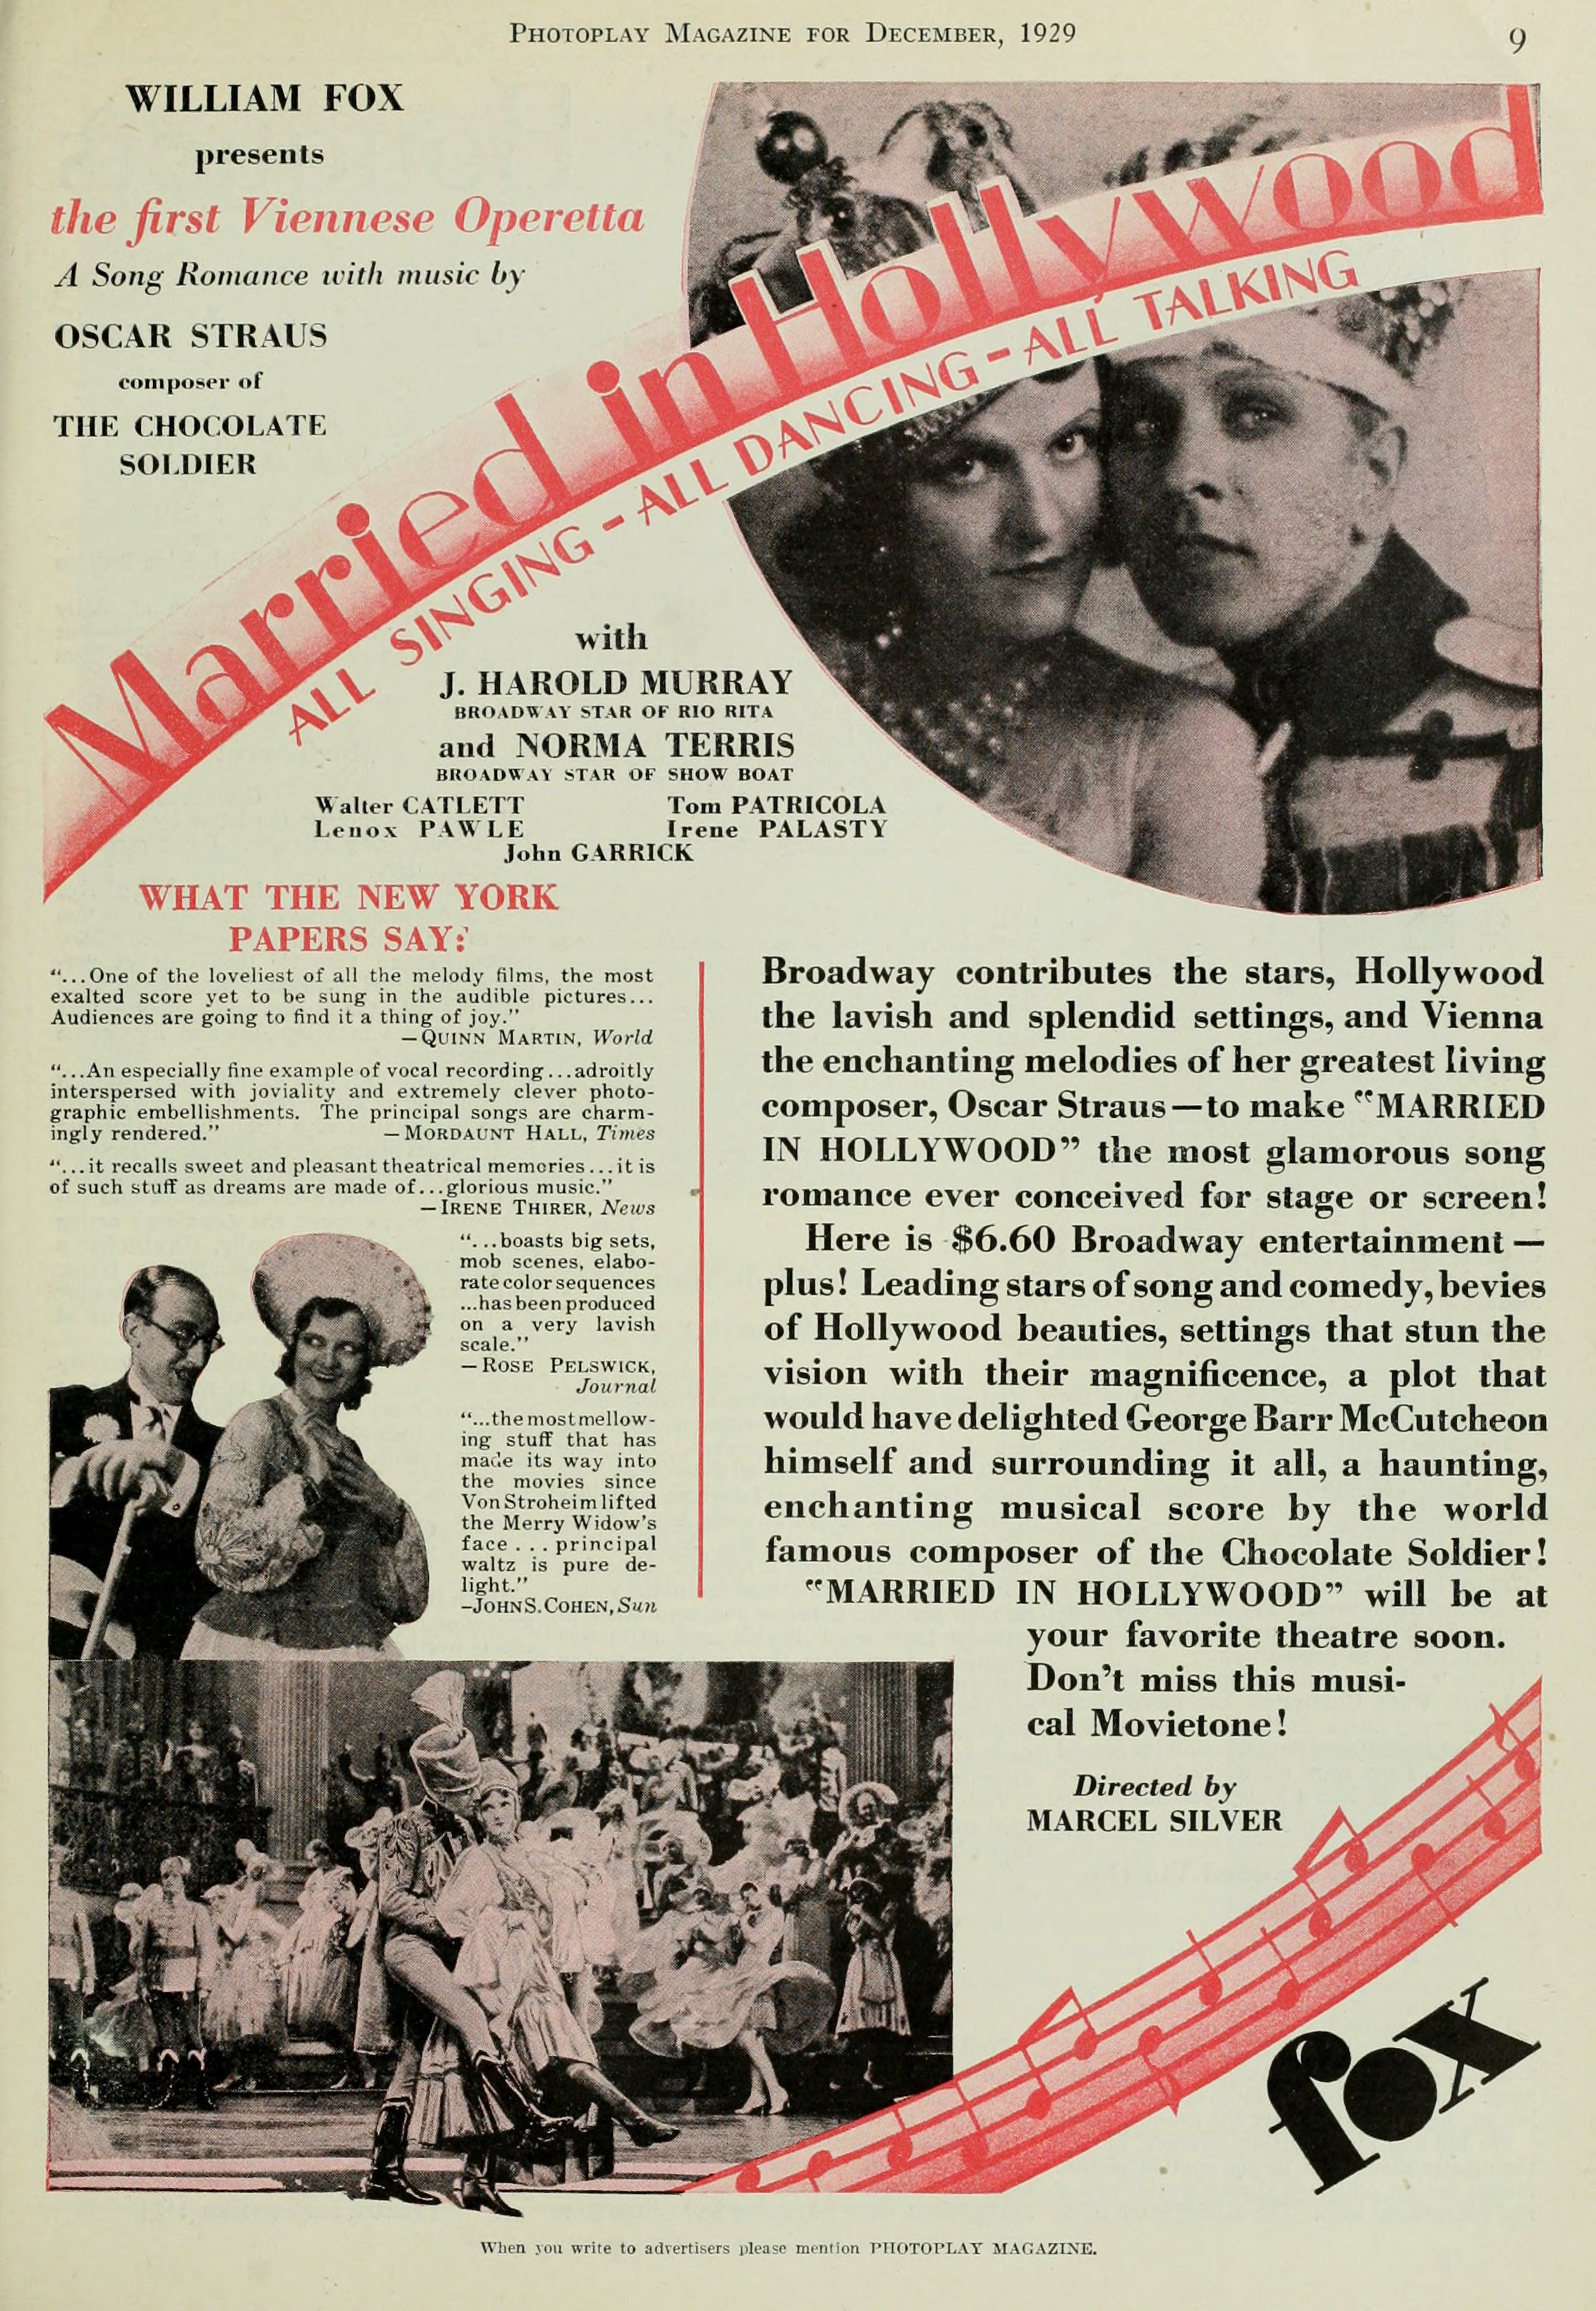 Married in Hollywood (1929) | www.vintoz.com